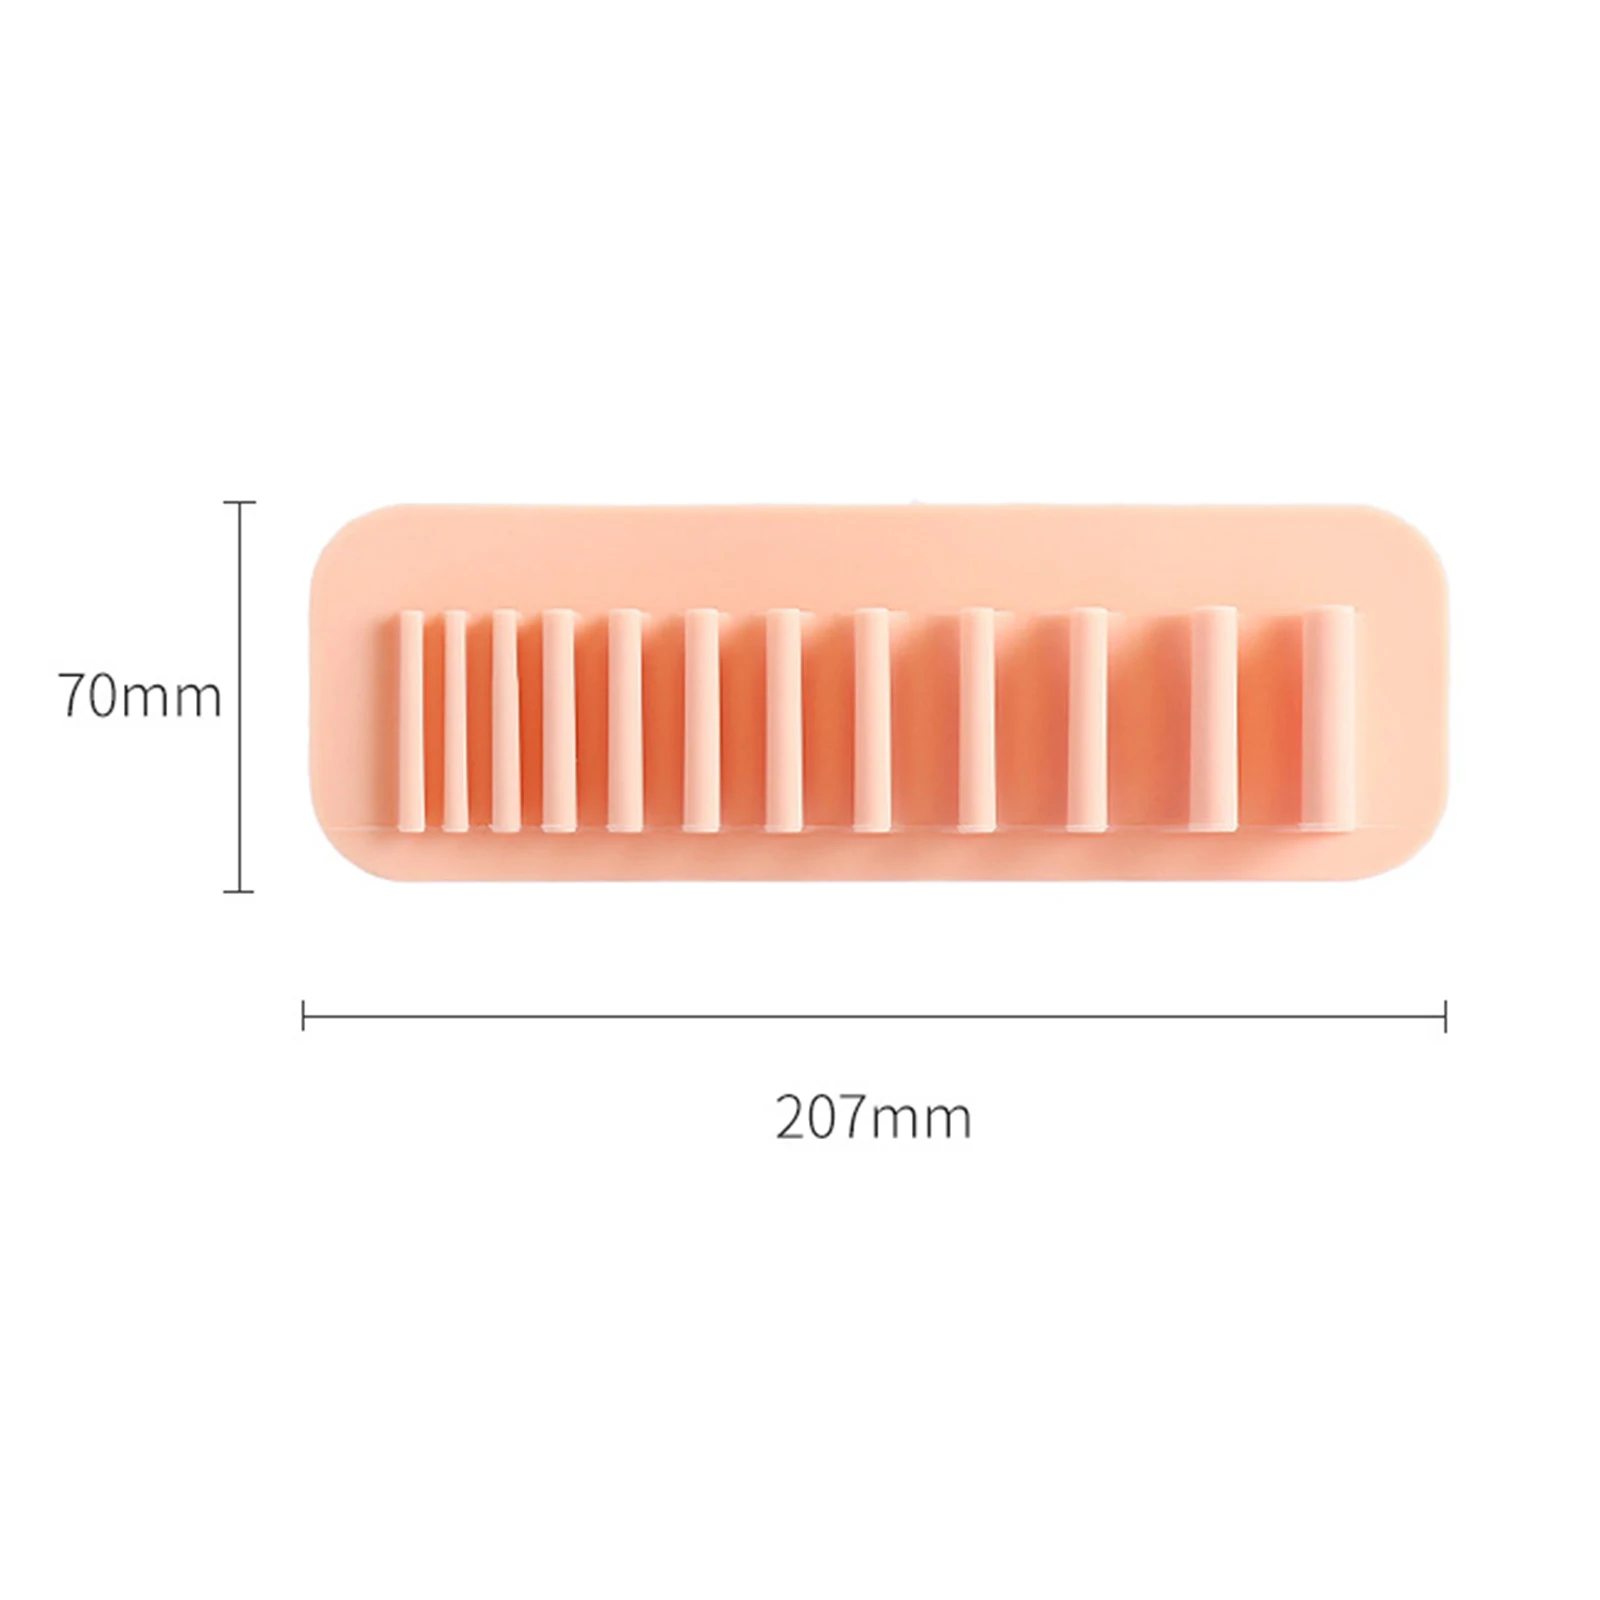 Silicone Wall Mount Nail Makeup Brush Holder Display Rack Shelf Stand Hanger Case Space Saving Beauty Cosmetic Tools